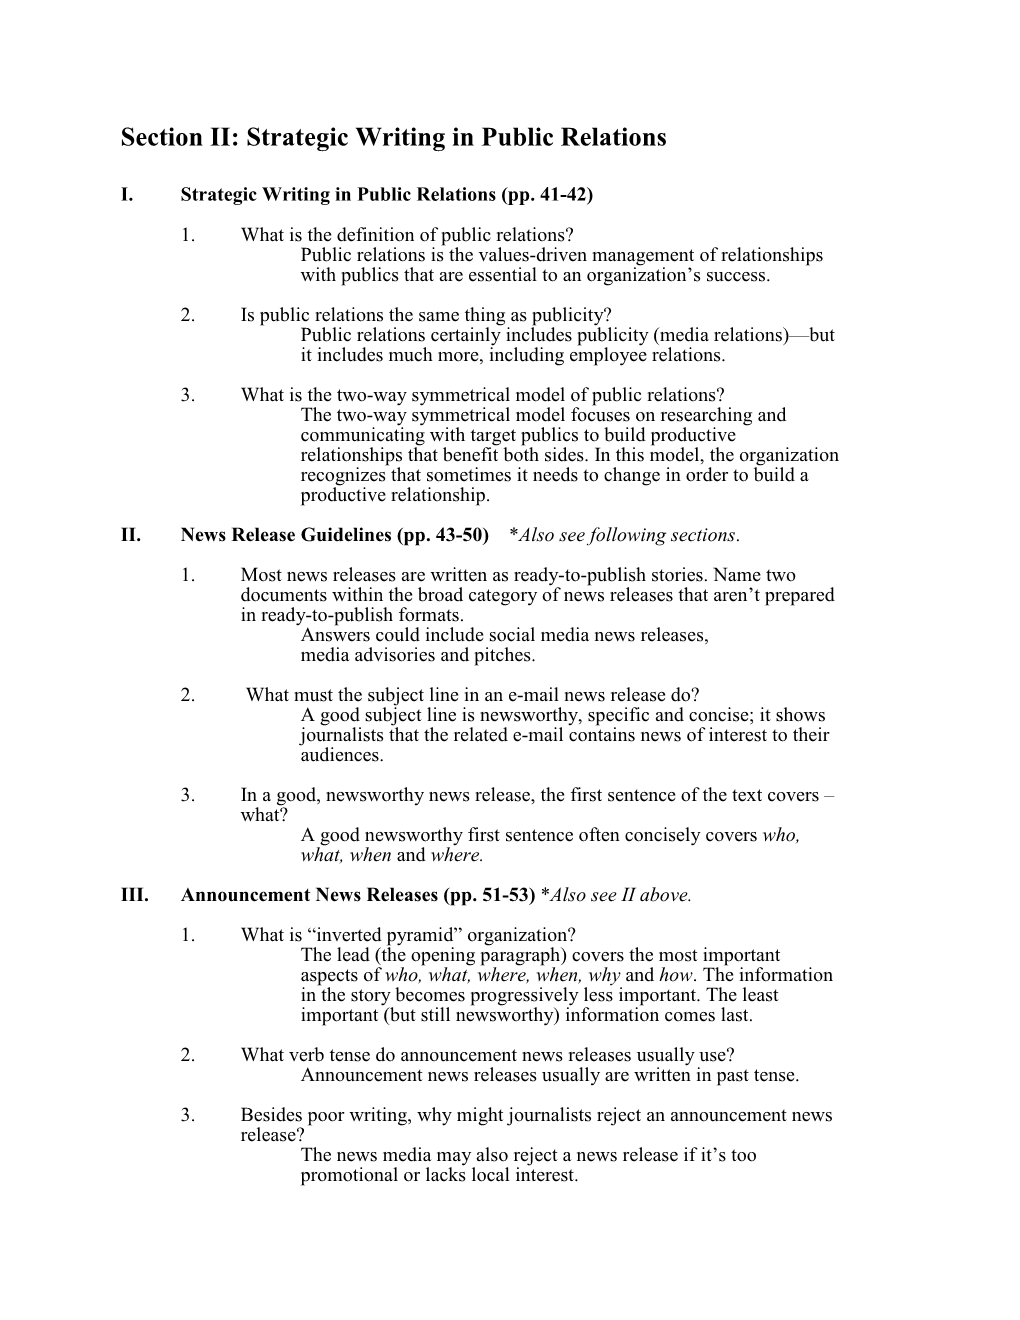 Section II: Strategic Writing in Public Relations